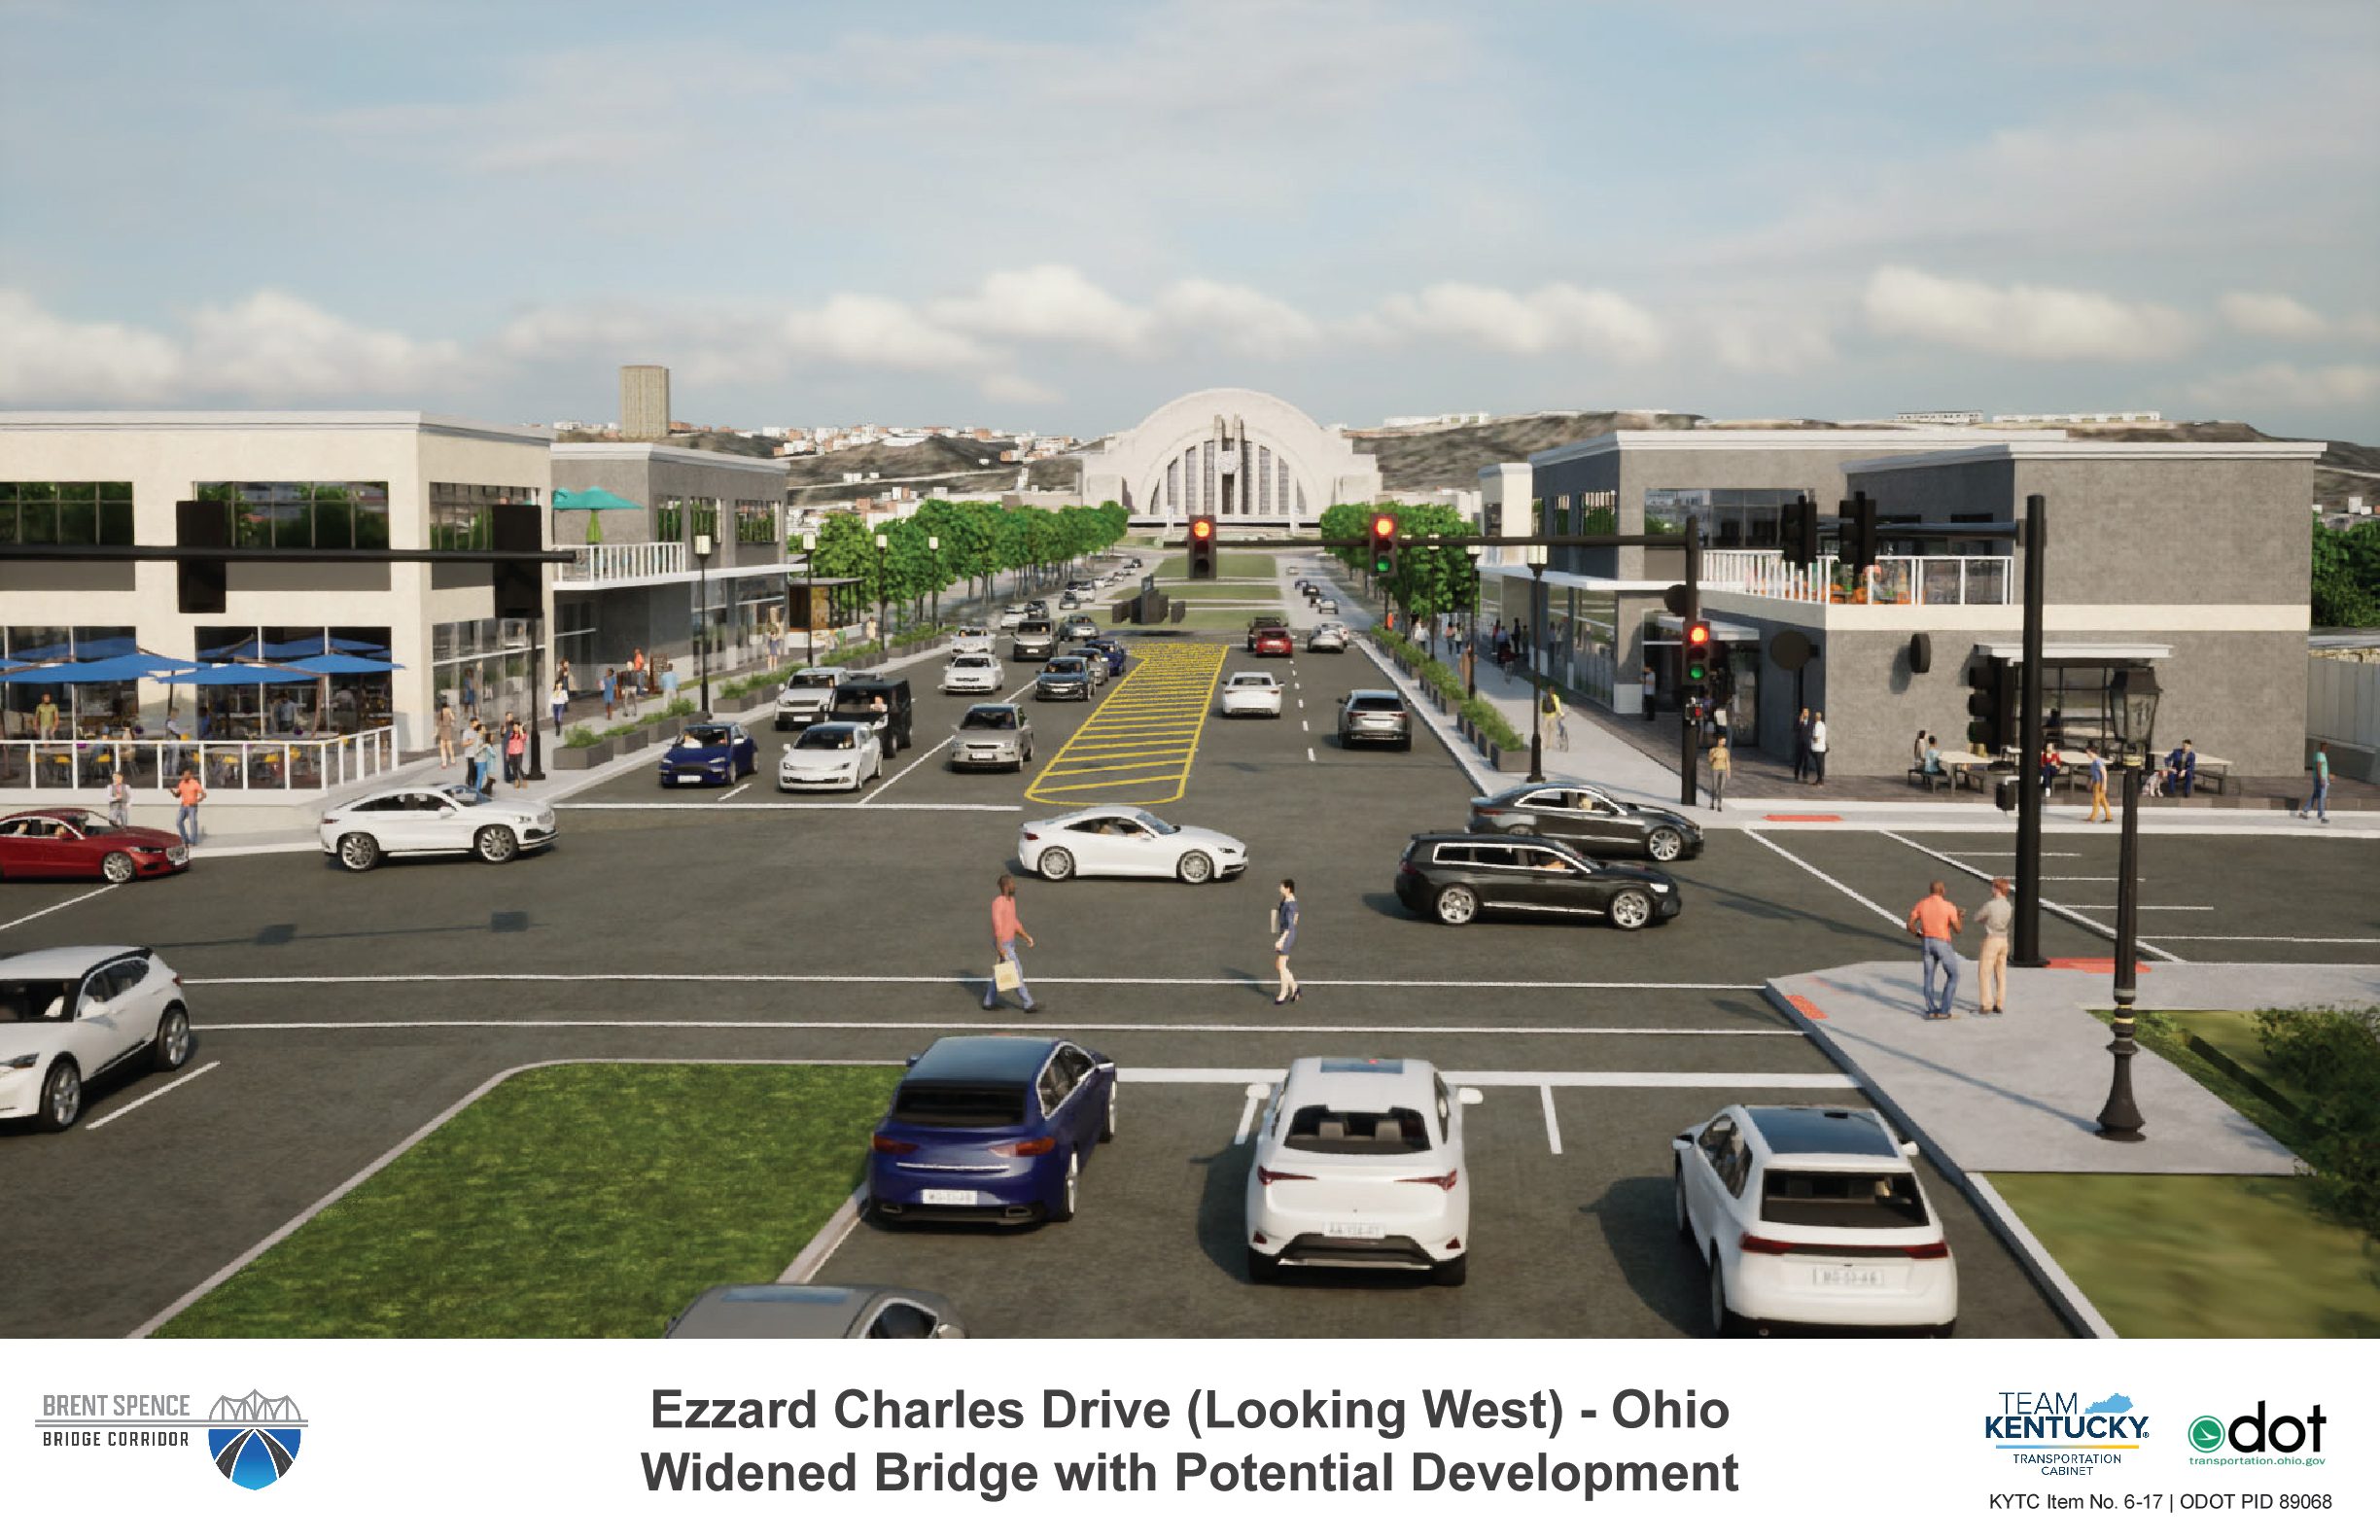 Changes Proposed to the Ezzard Charles Bridge